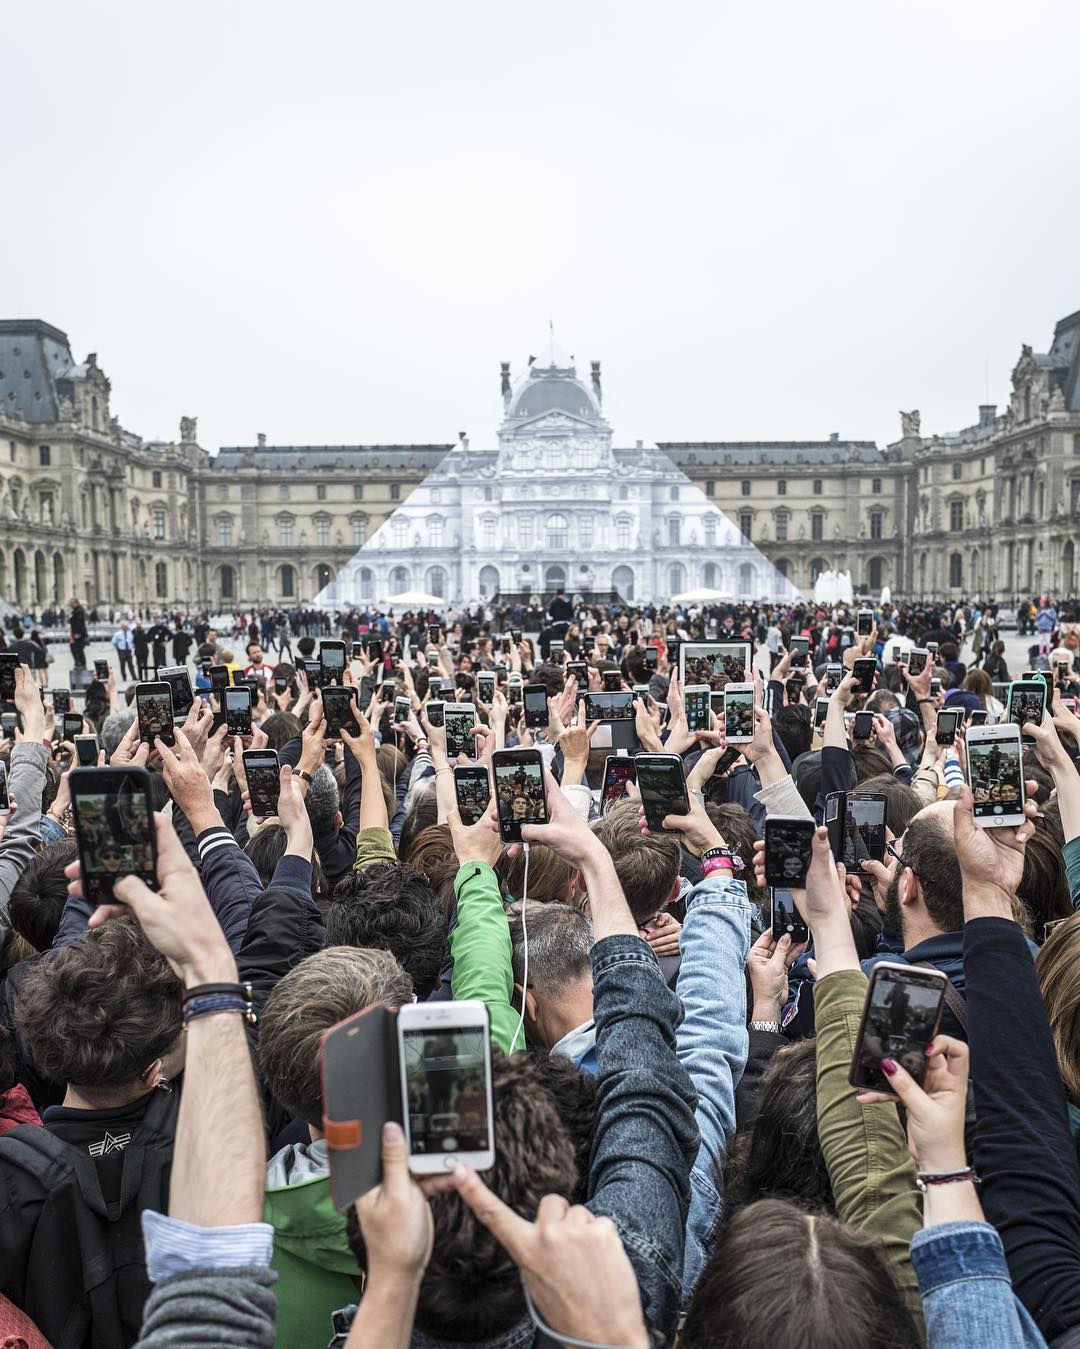 Louvre visitors take selfies beside the Pyramid